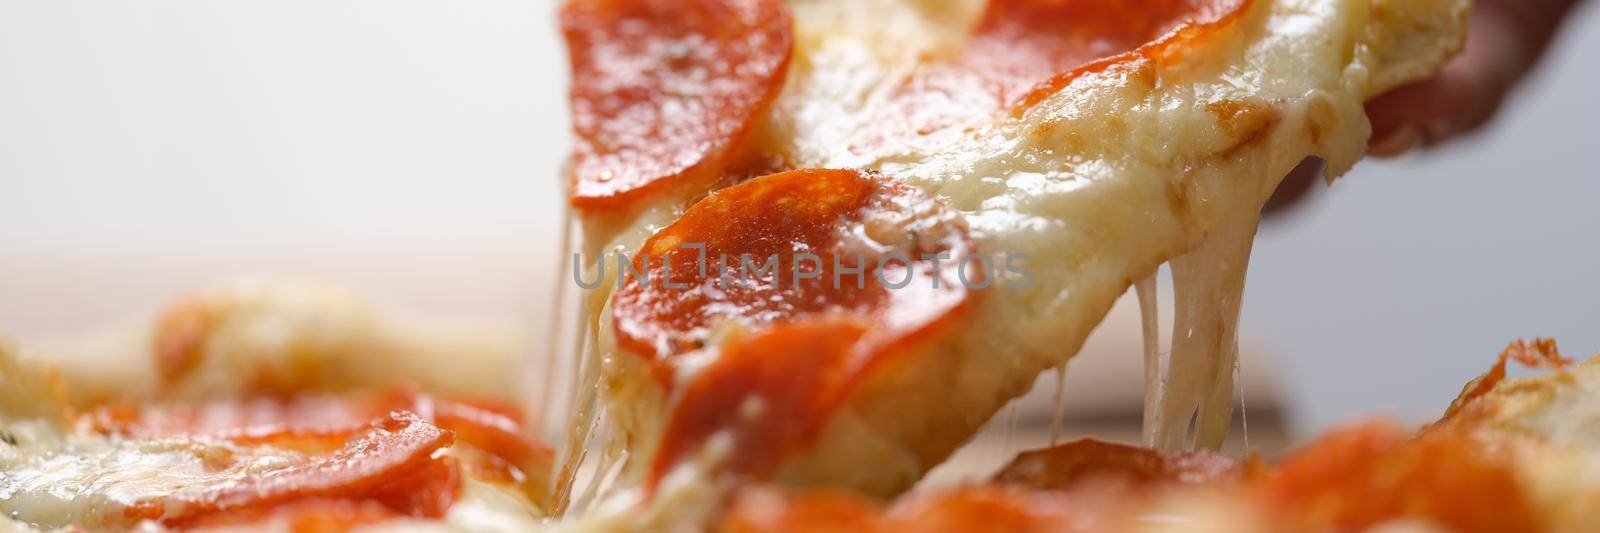 Slice of juicy fresh hot pizza is taken out of box closeup by kuprevich